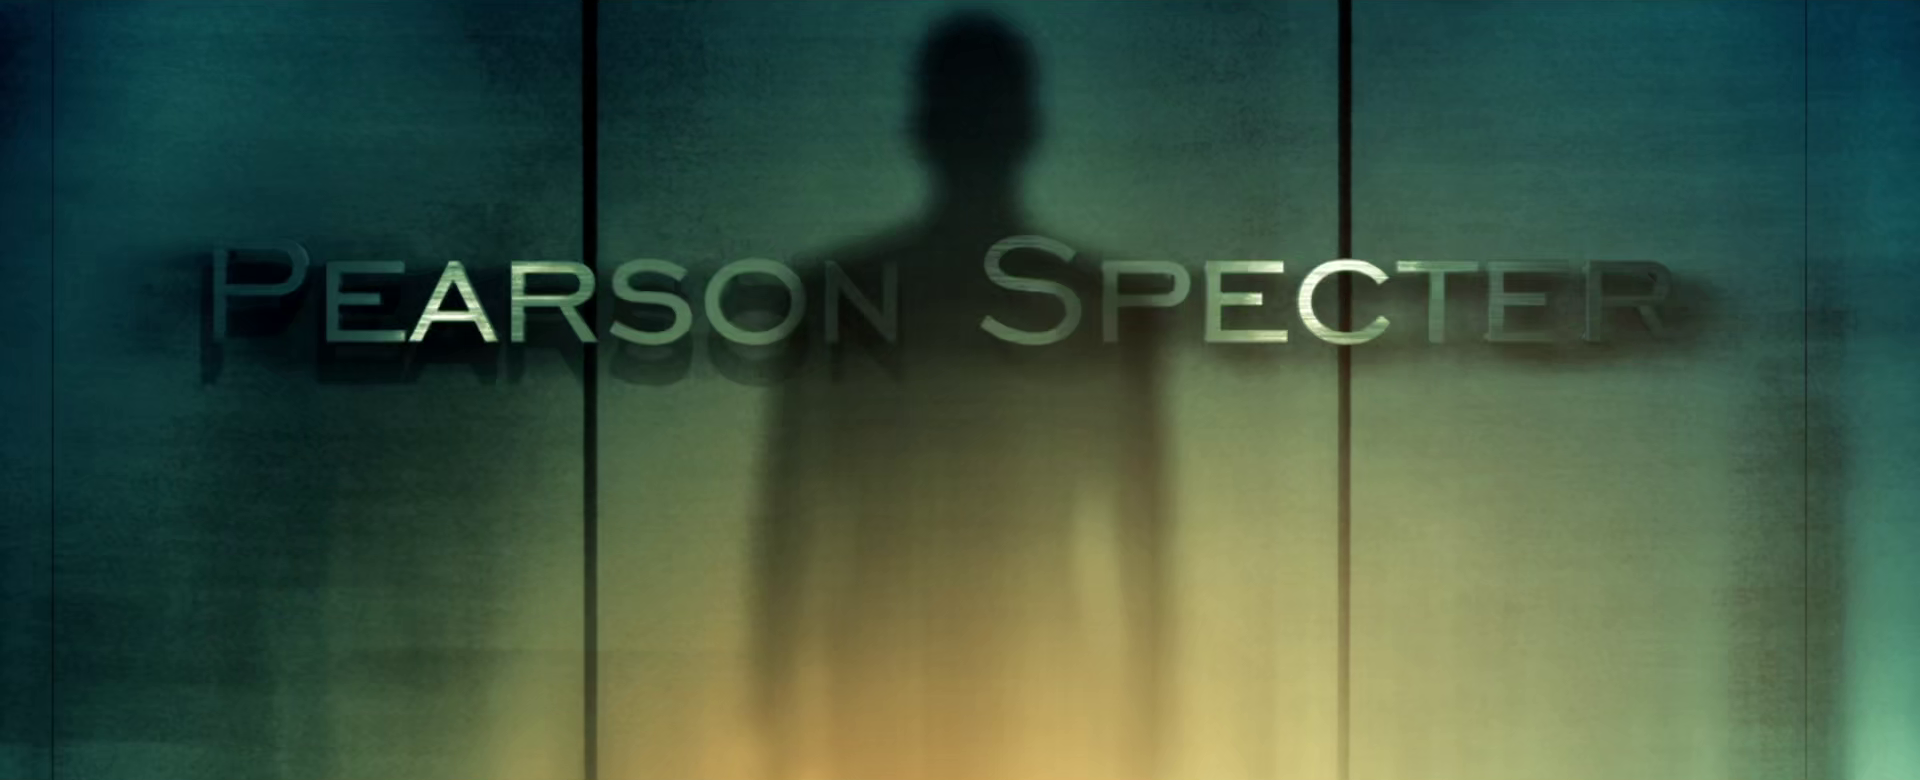 suits pearson specter